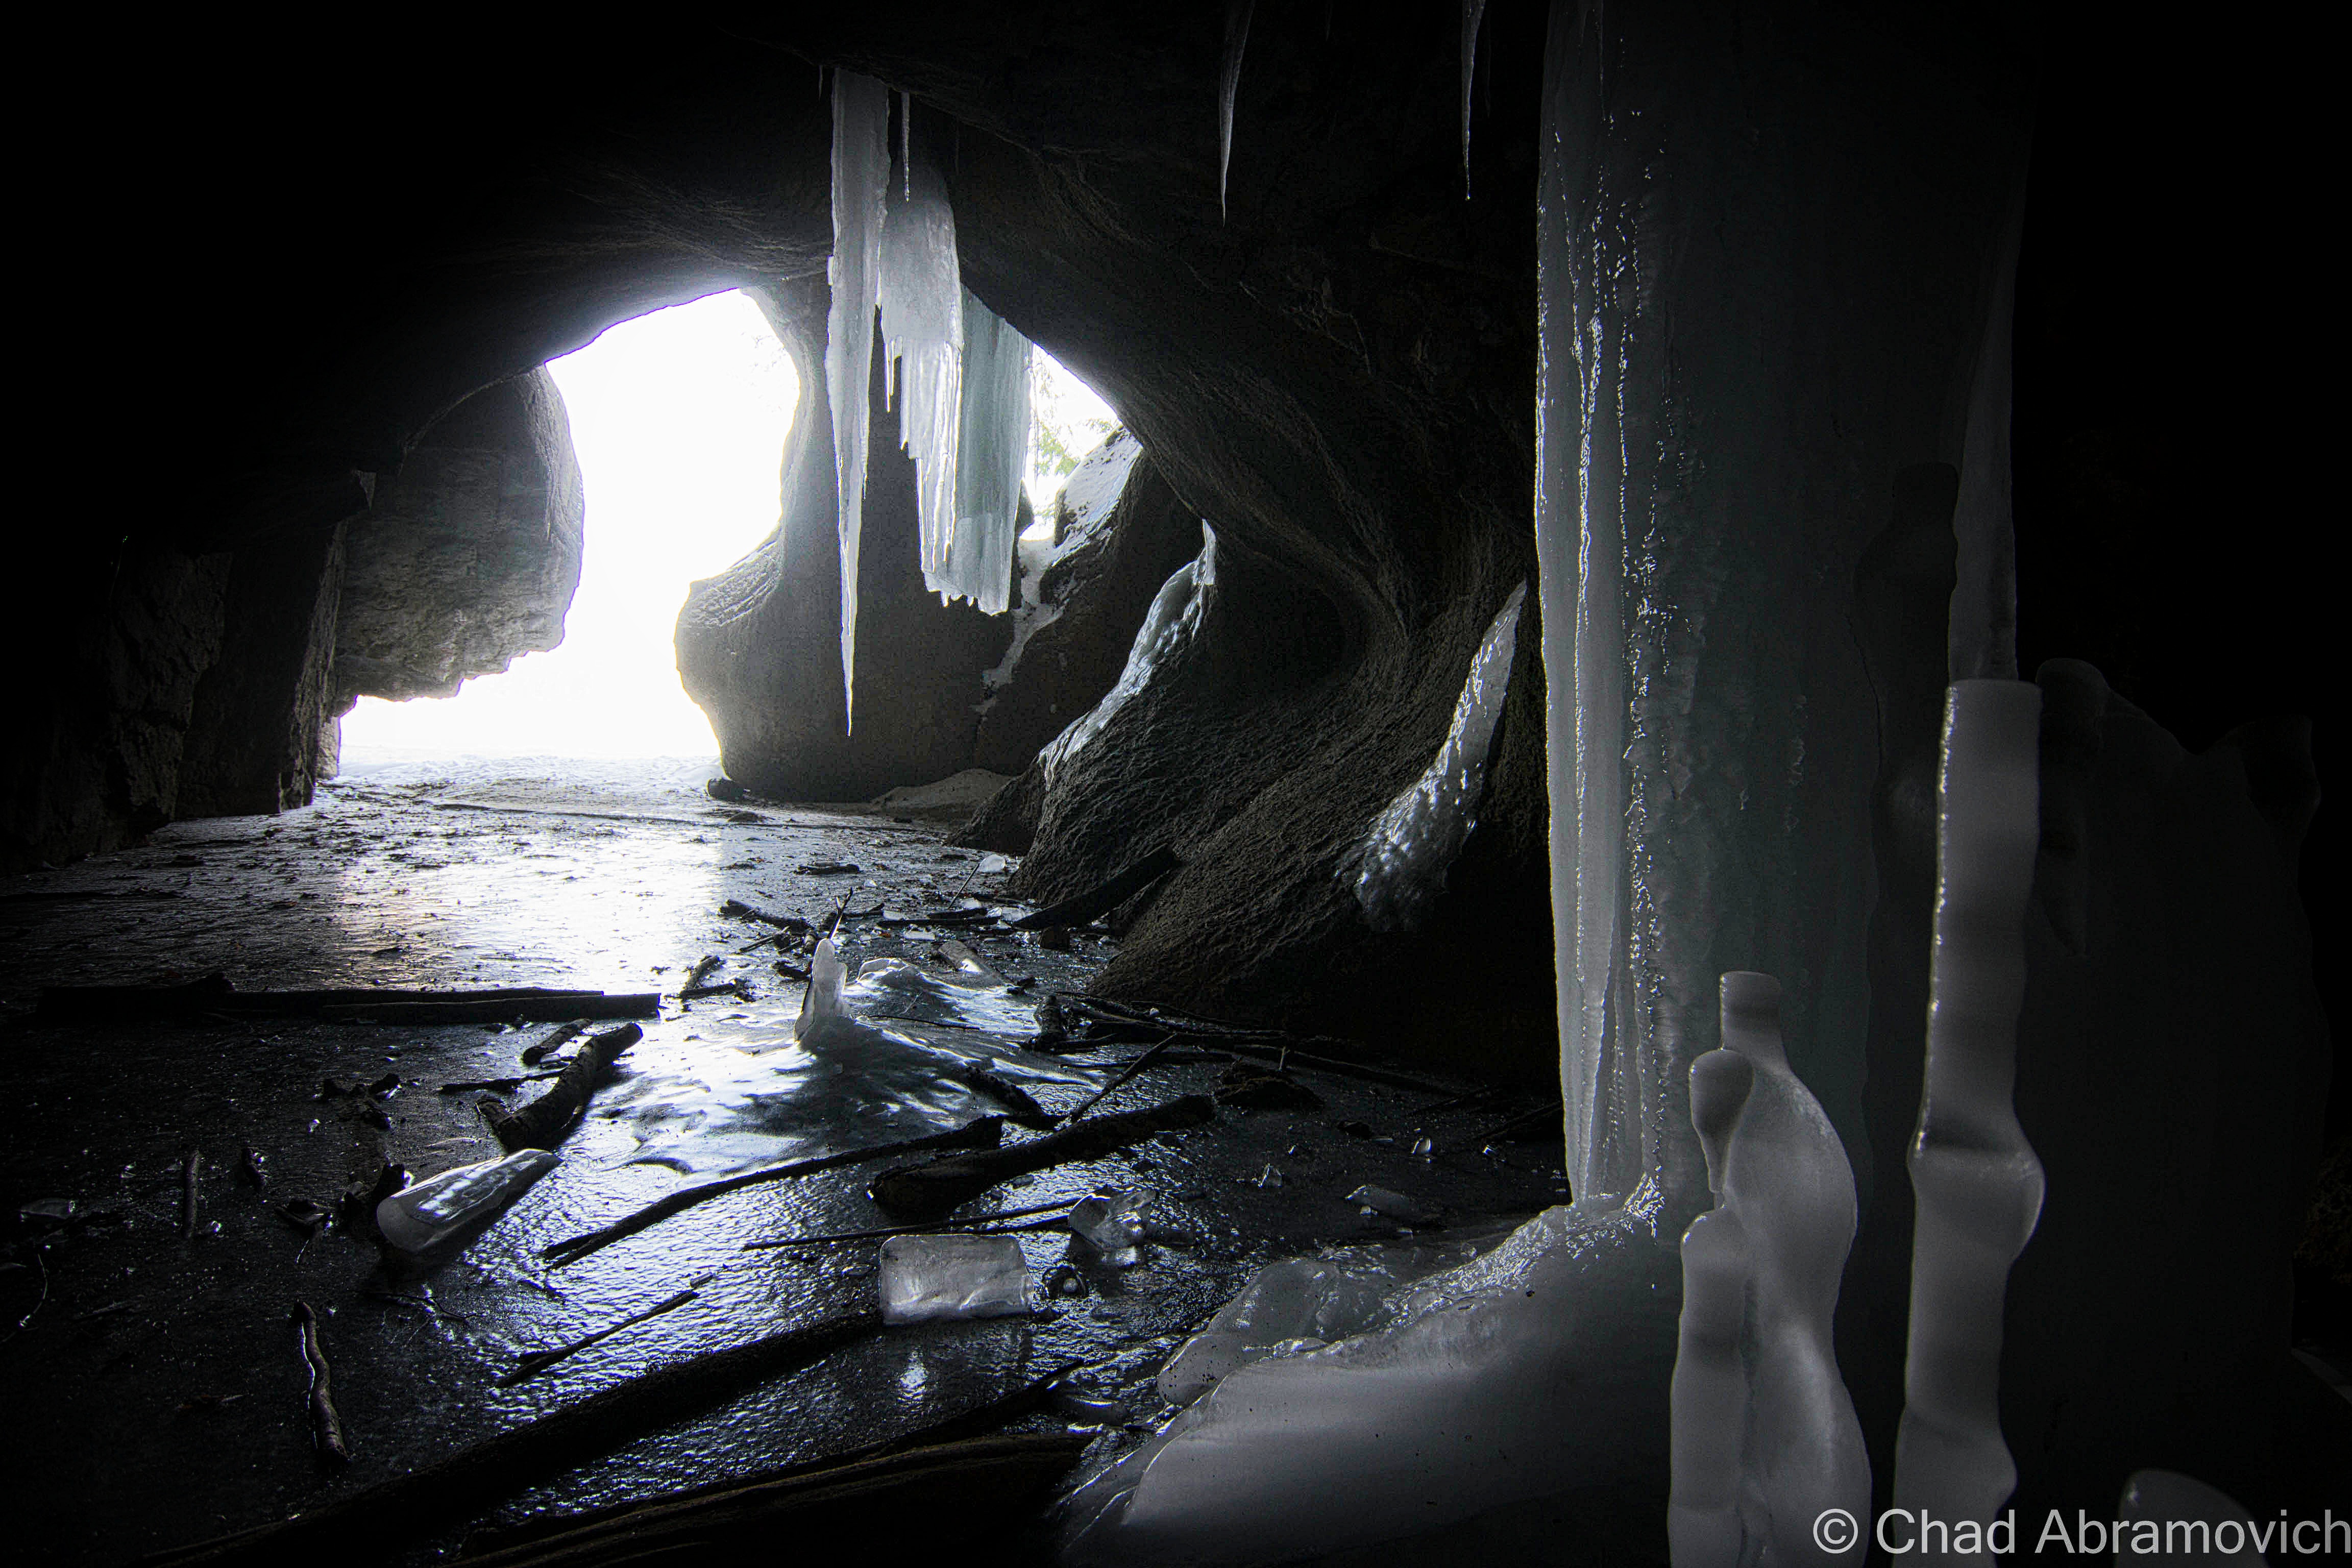 As the cave ascended further back into the hill, I noticed there was movement beneath the layers of ice under my feet. There was running water lapping below in black pools, and the darting motions of hundreds of minnows 